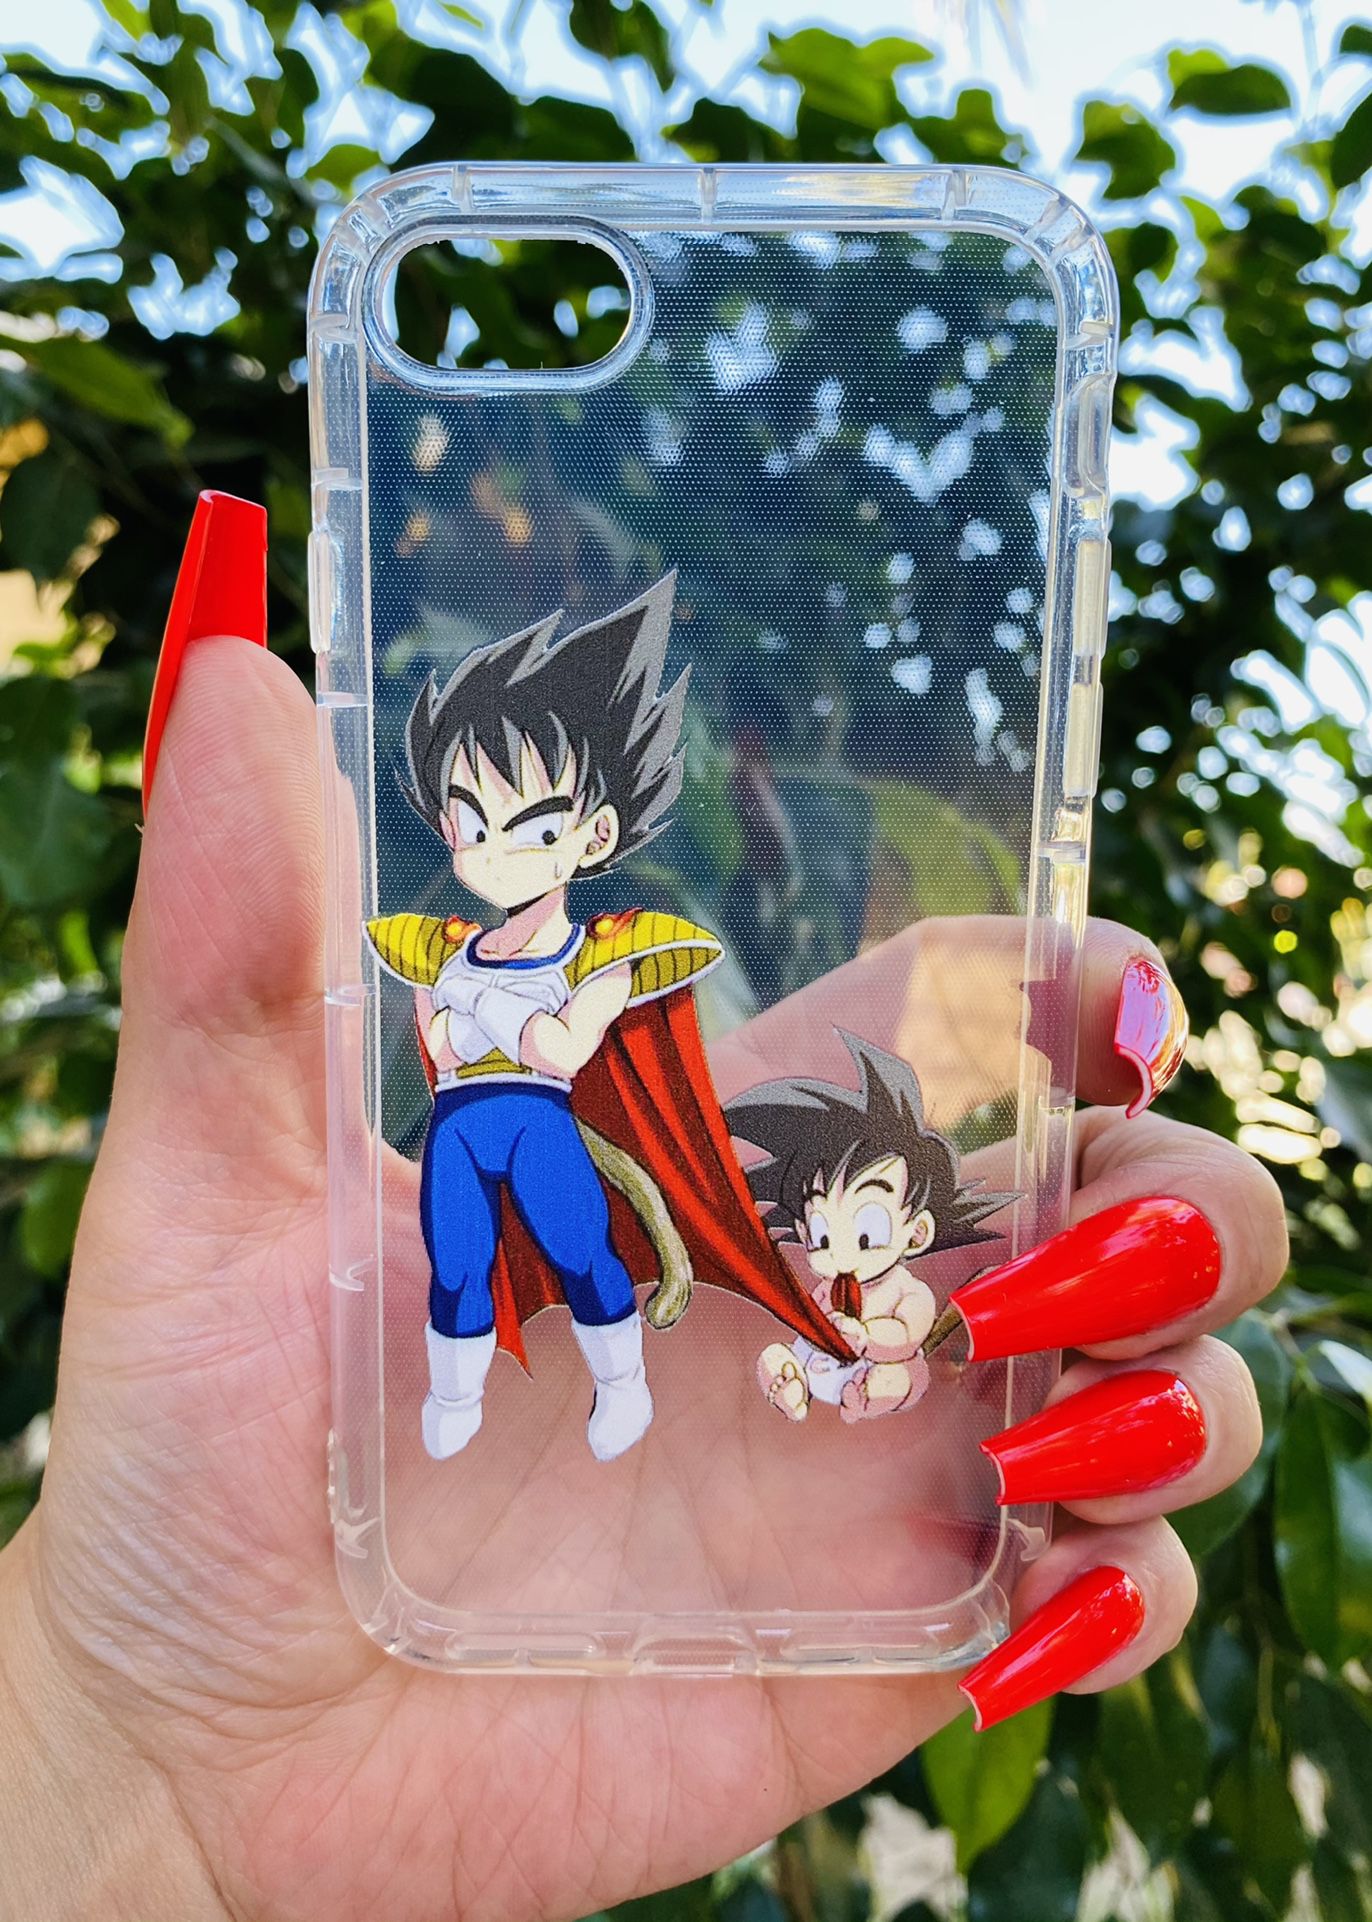 Brand new cool iphone 7, 8 or 2020 SE case cover rubber Clear transparent see through Goku dragon ball z DBZ super saiyan anime mens guys hypebeast h